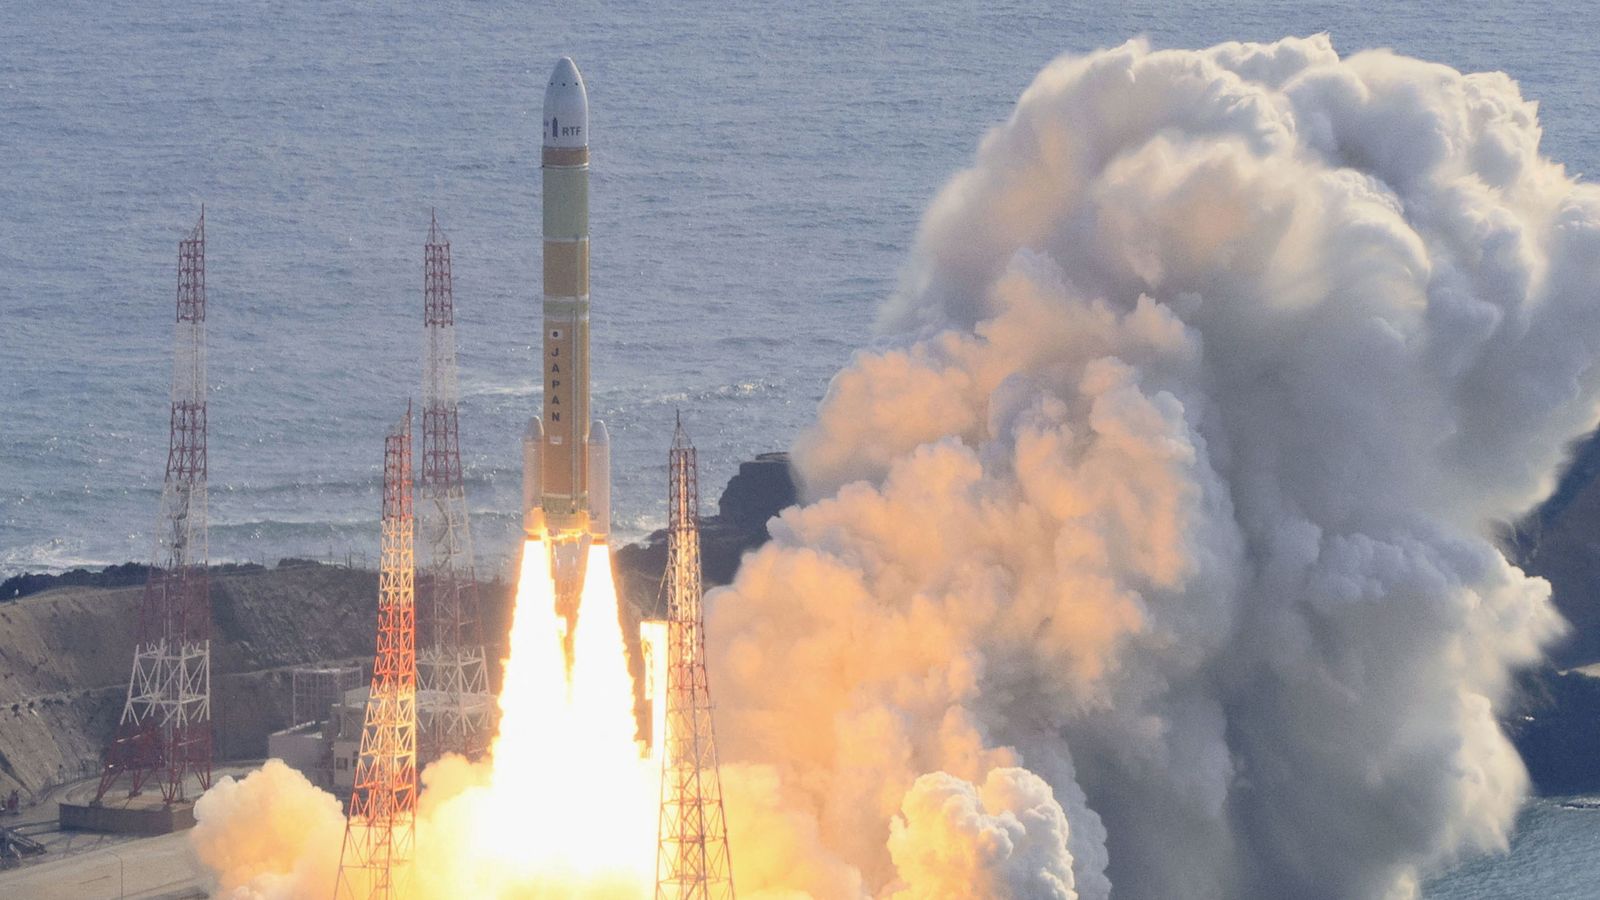 Japan: New H3 flagship rocket reaches orbit in key test after failed debut last year